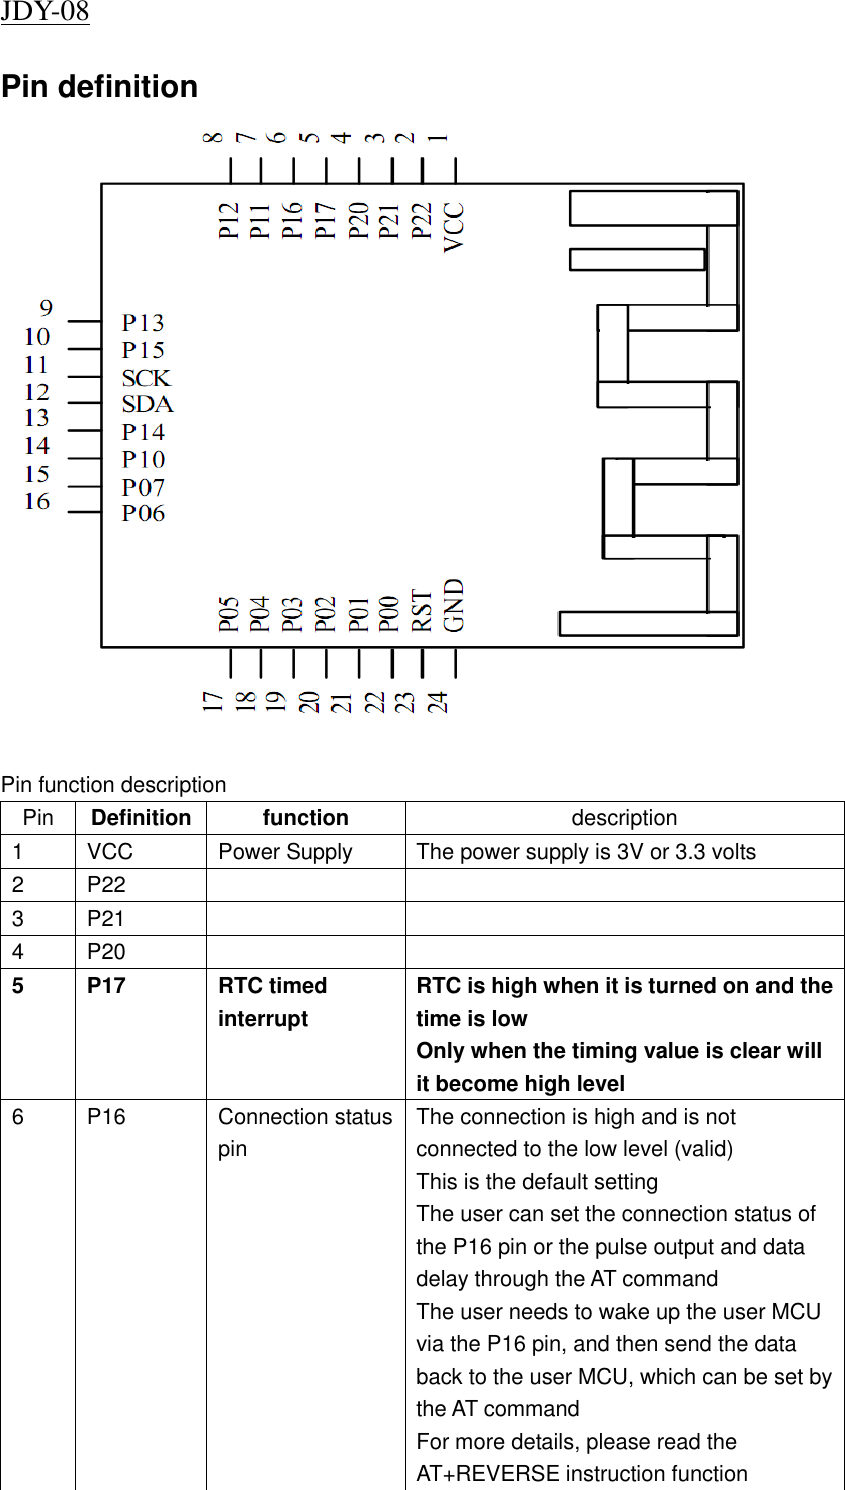 JDY-08                         Pin definition   Pin function description Pin Definition function description 1 VCC Power Supply The power supply is 3V or 3.3 volts 2 P22   3 P21   4 P20   5 P17 RTC timed interrupt RTC is high when it is turned on and the time is low Only when the timing value is clear will it become high level 6 P16 Connection status pin The connection is high and is not connected to the low level (valid) This is the default setting The user can set the connection status of the P16 pin or the pulse output and data delay through the AT command The user needs to wake up the user MCU via the P16 pin, and then send the data back to the user MCU, which can be set by the AT command For more details, please read the AT+REVERSE instruction function 